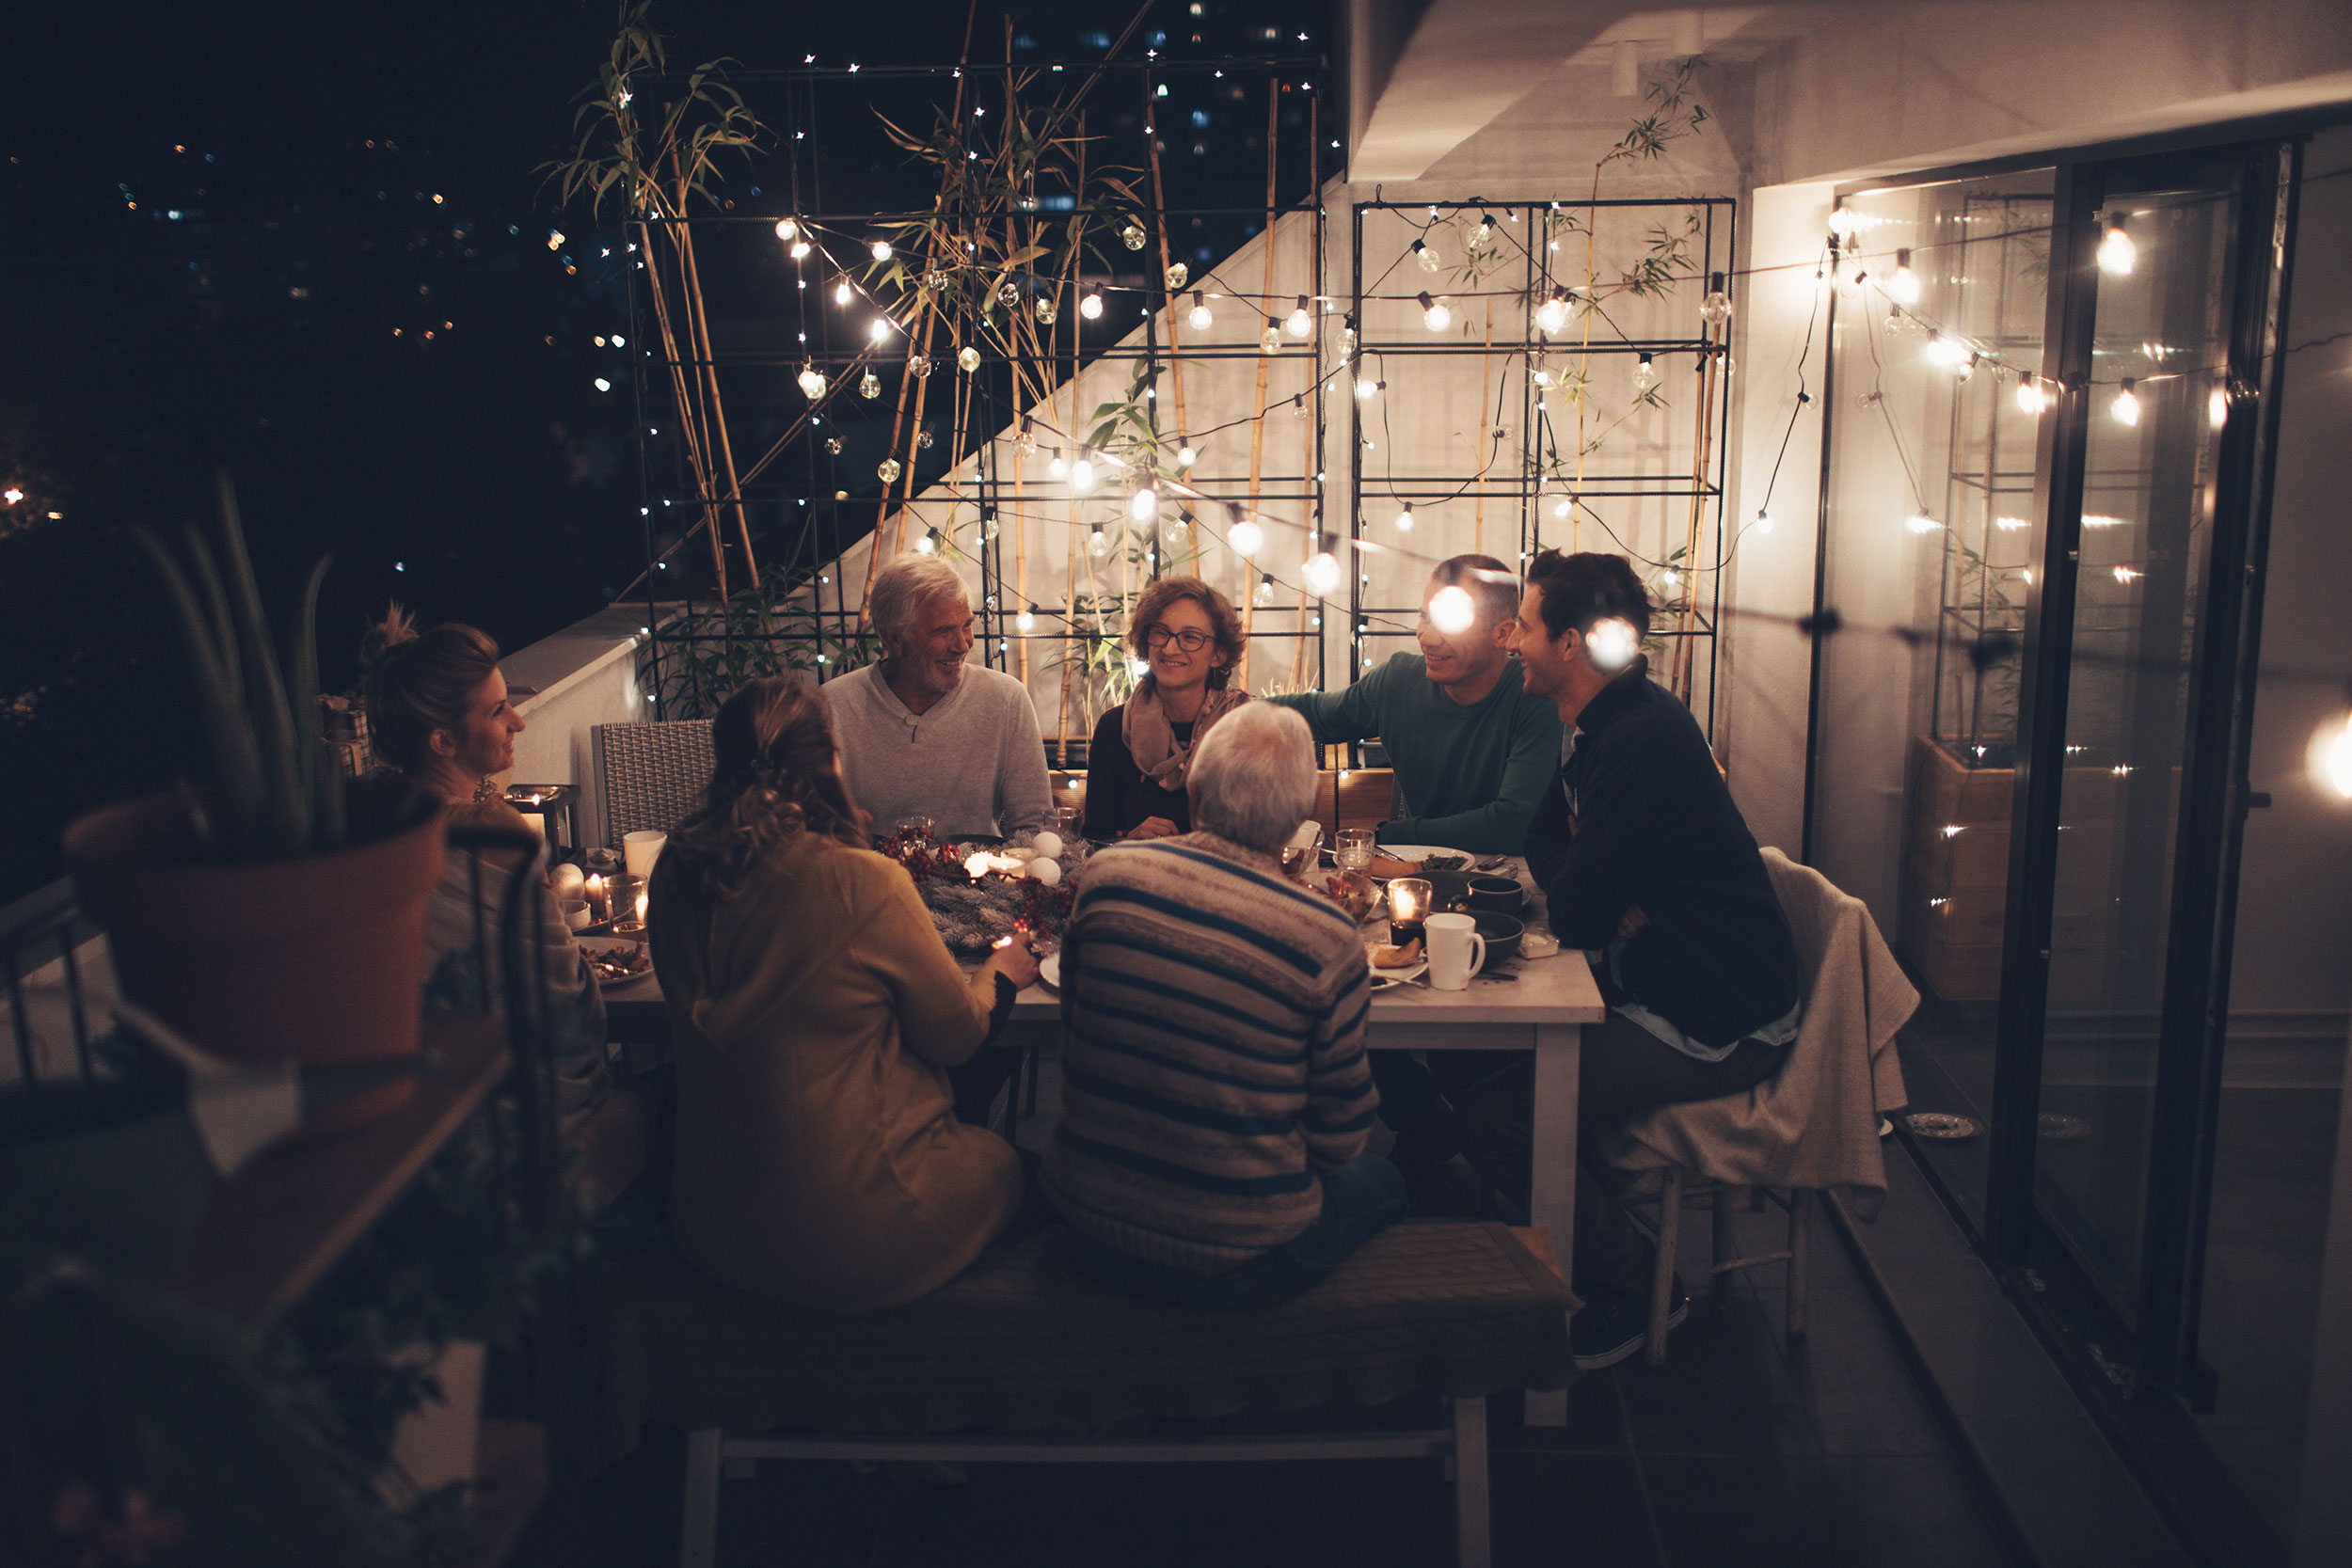 Photo of a family around the dinner table for Passover, shown laughing and enjoying each other's company.